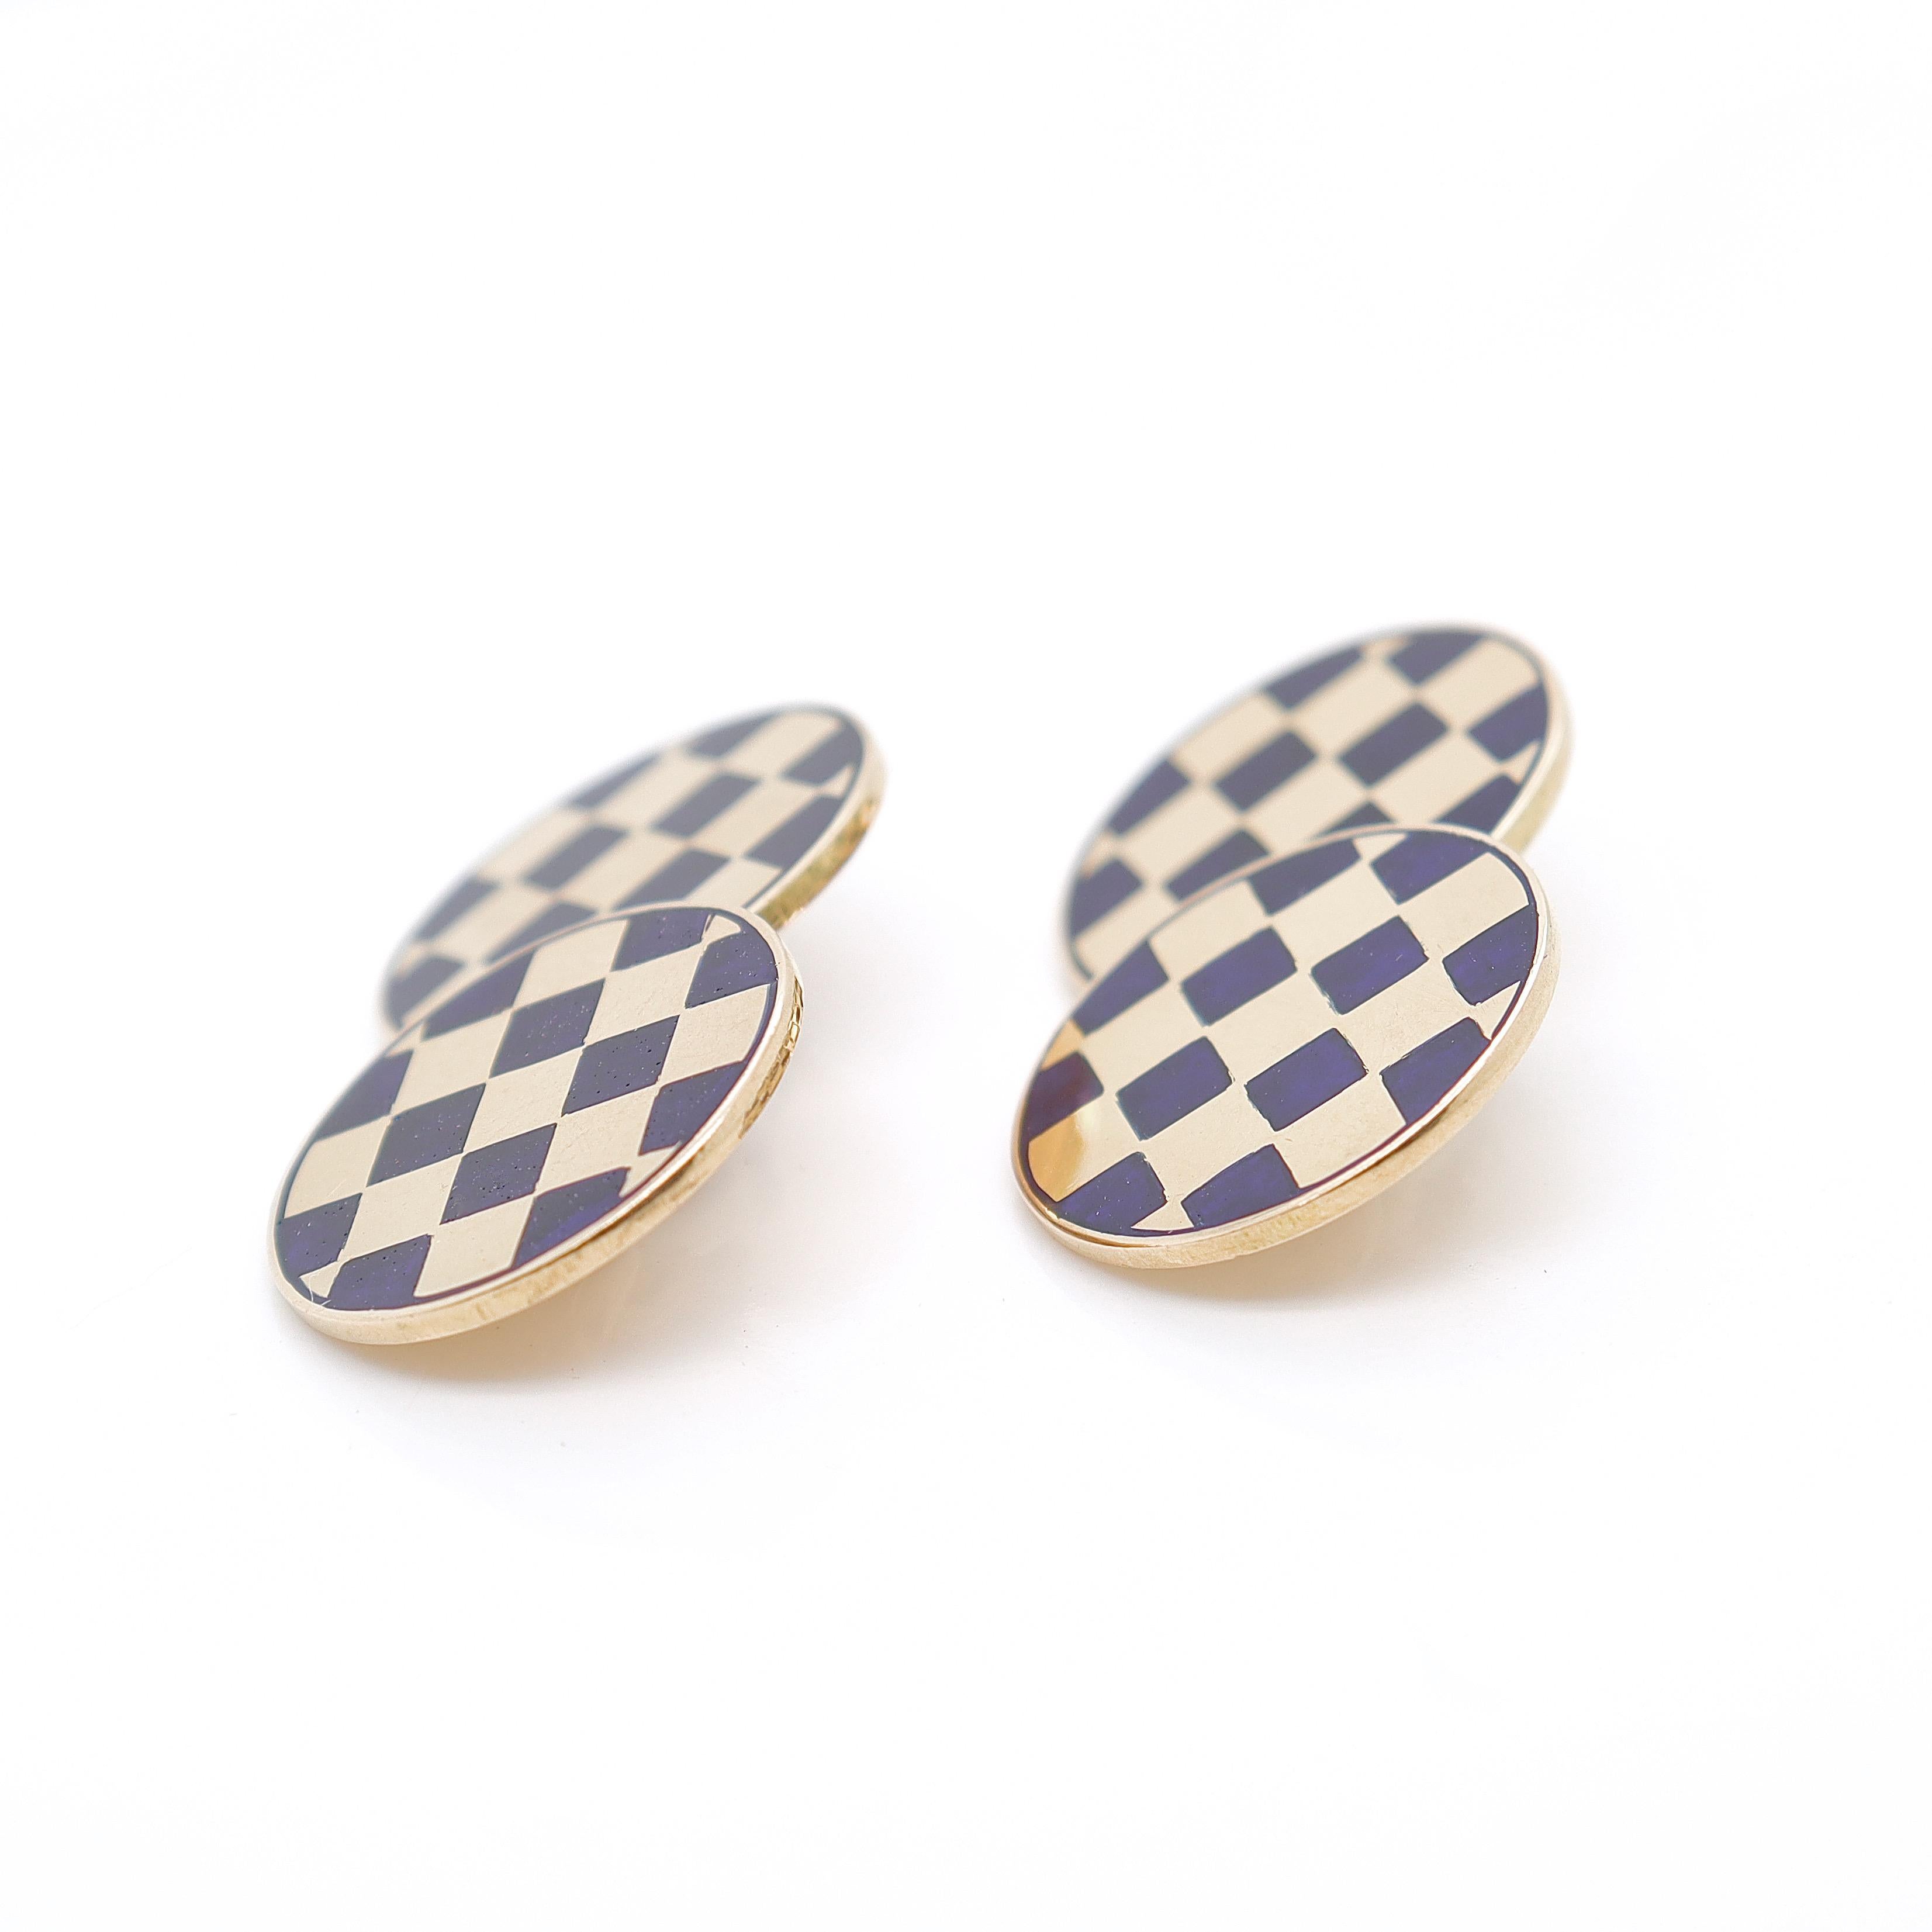 Pair of Vintage 14K Yellow Gold & Blue Enamel Checkerboard Cufflinks For Sale 1